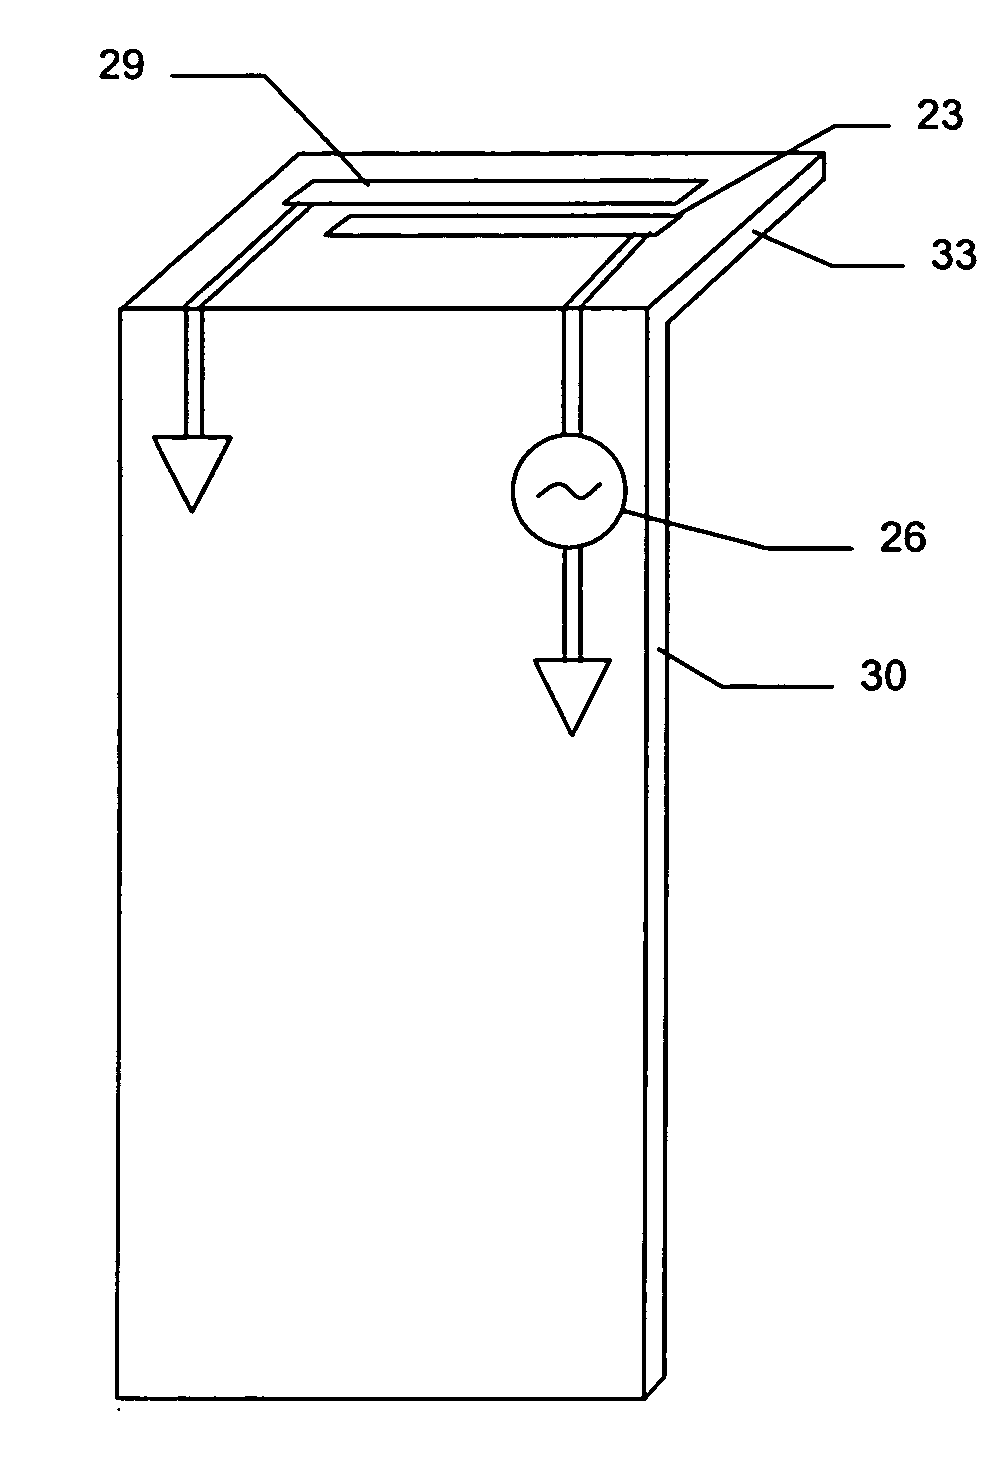 Mobile wireless communications device comprising a satellite positioning system antenna with active and passive elements and related methods